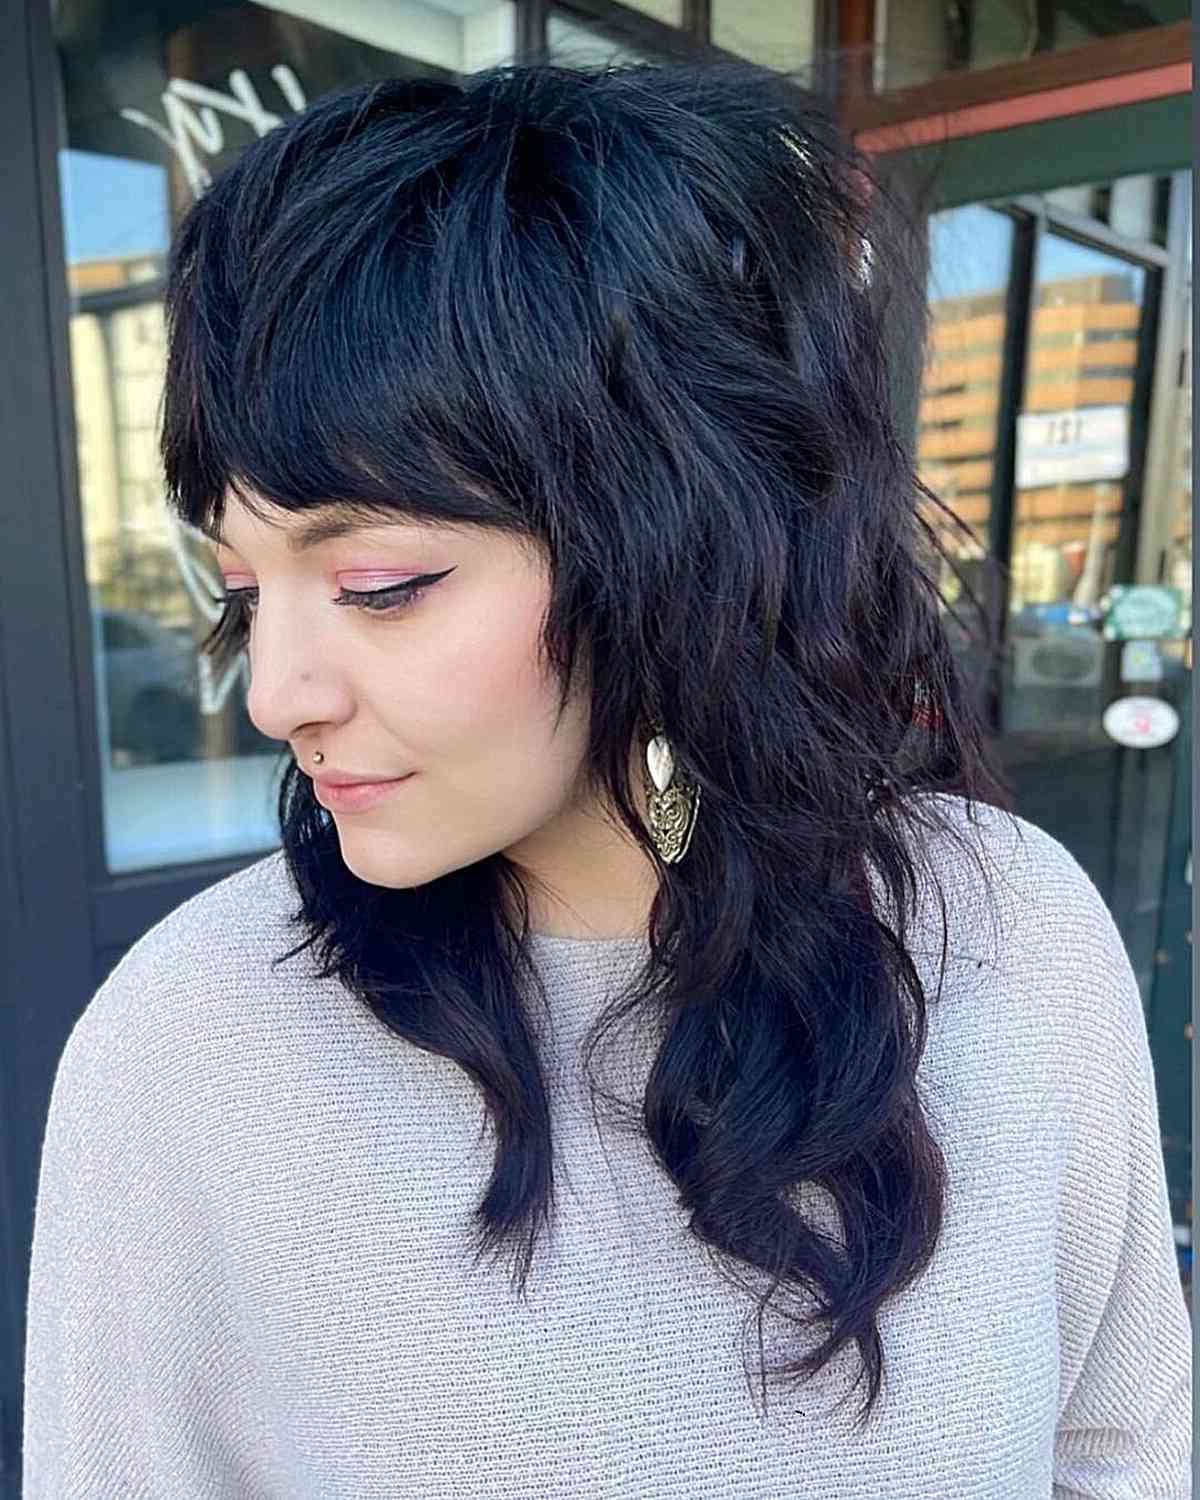 Most Up To Date Medium Shaggy Black Hair With Bangs Regarding 90 Chic Medium Shag Haircuts With Bangs For An On Trend Style (Gallery 3 of 15)